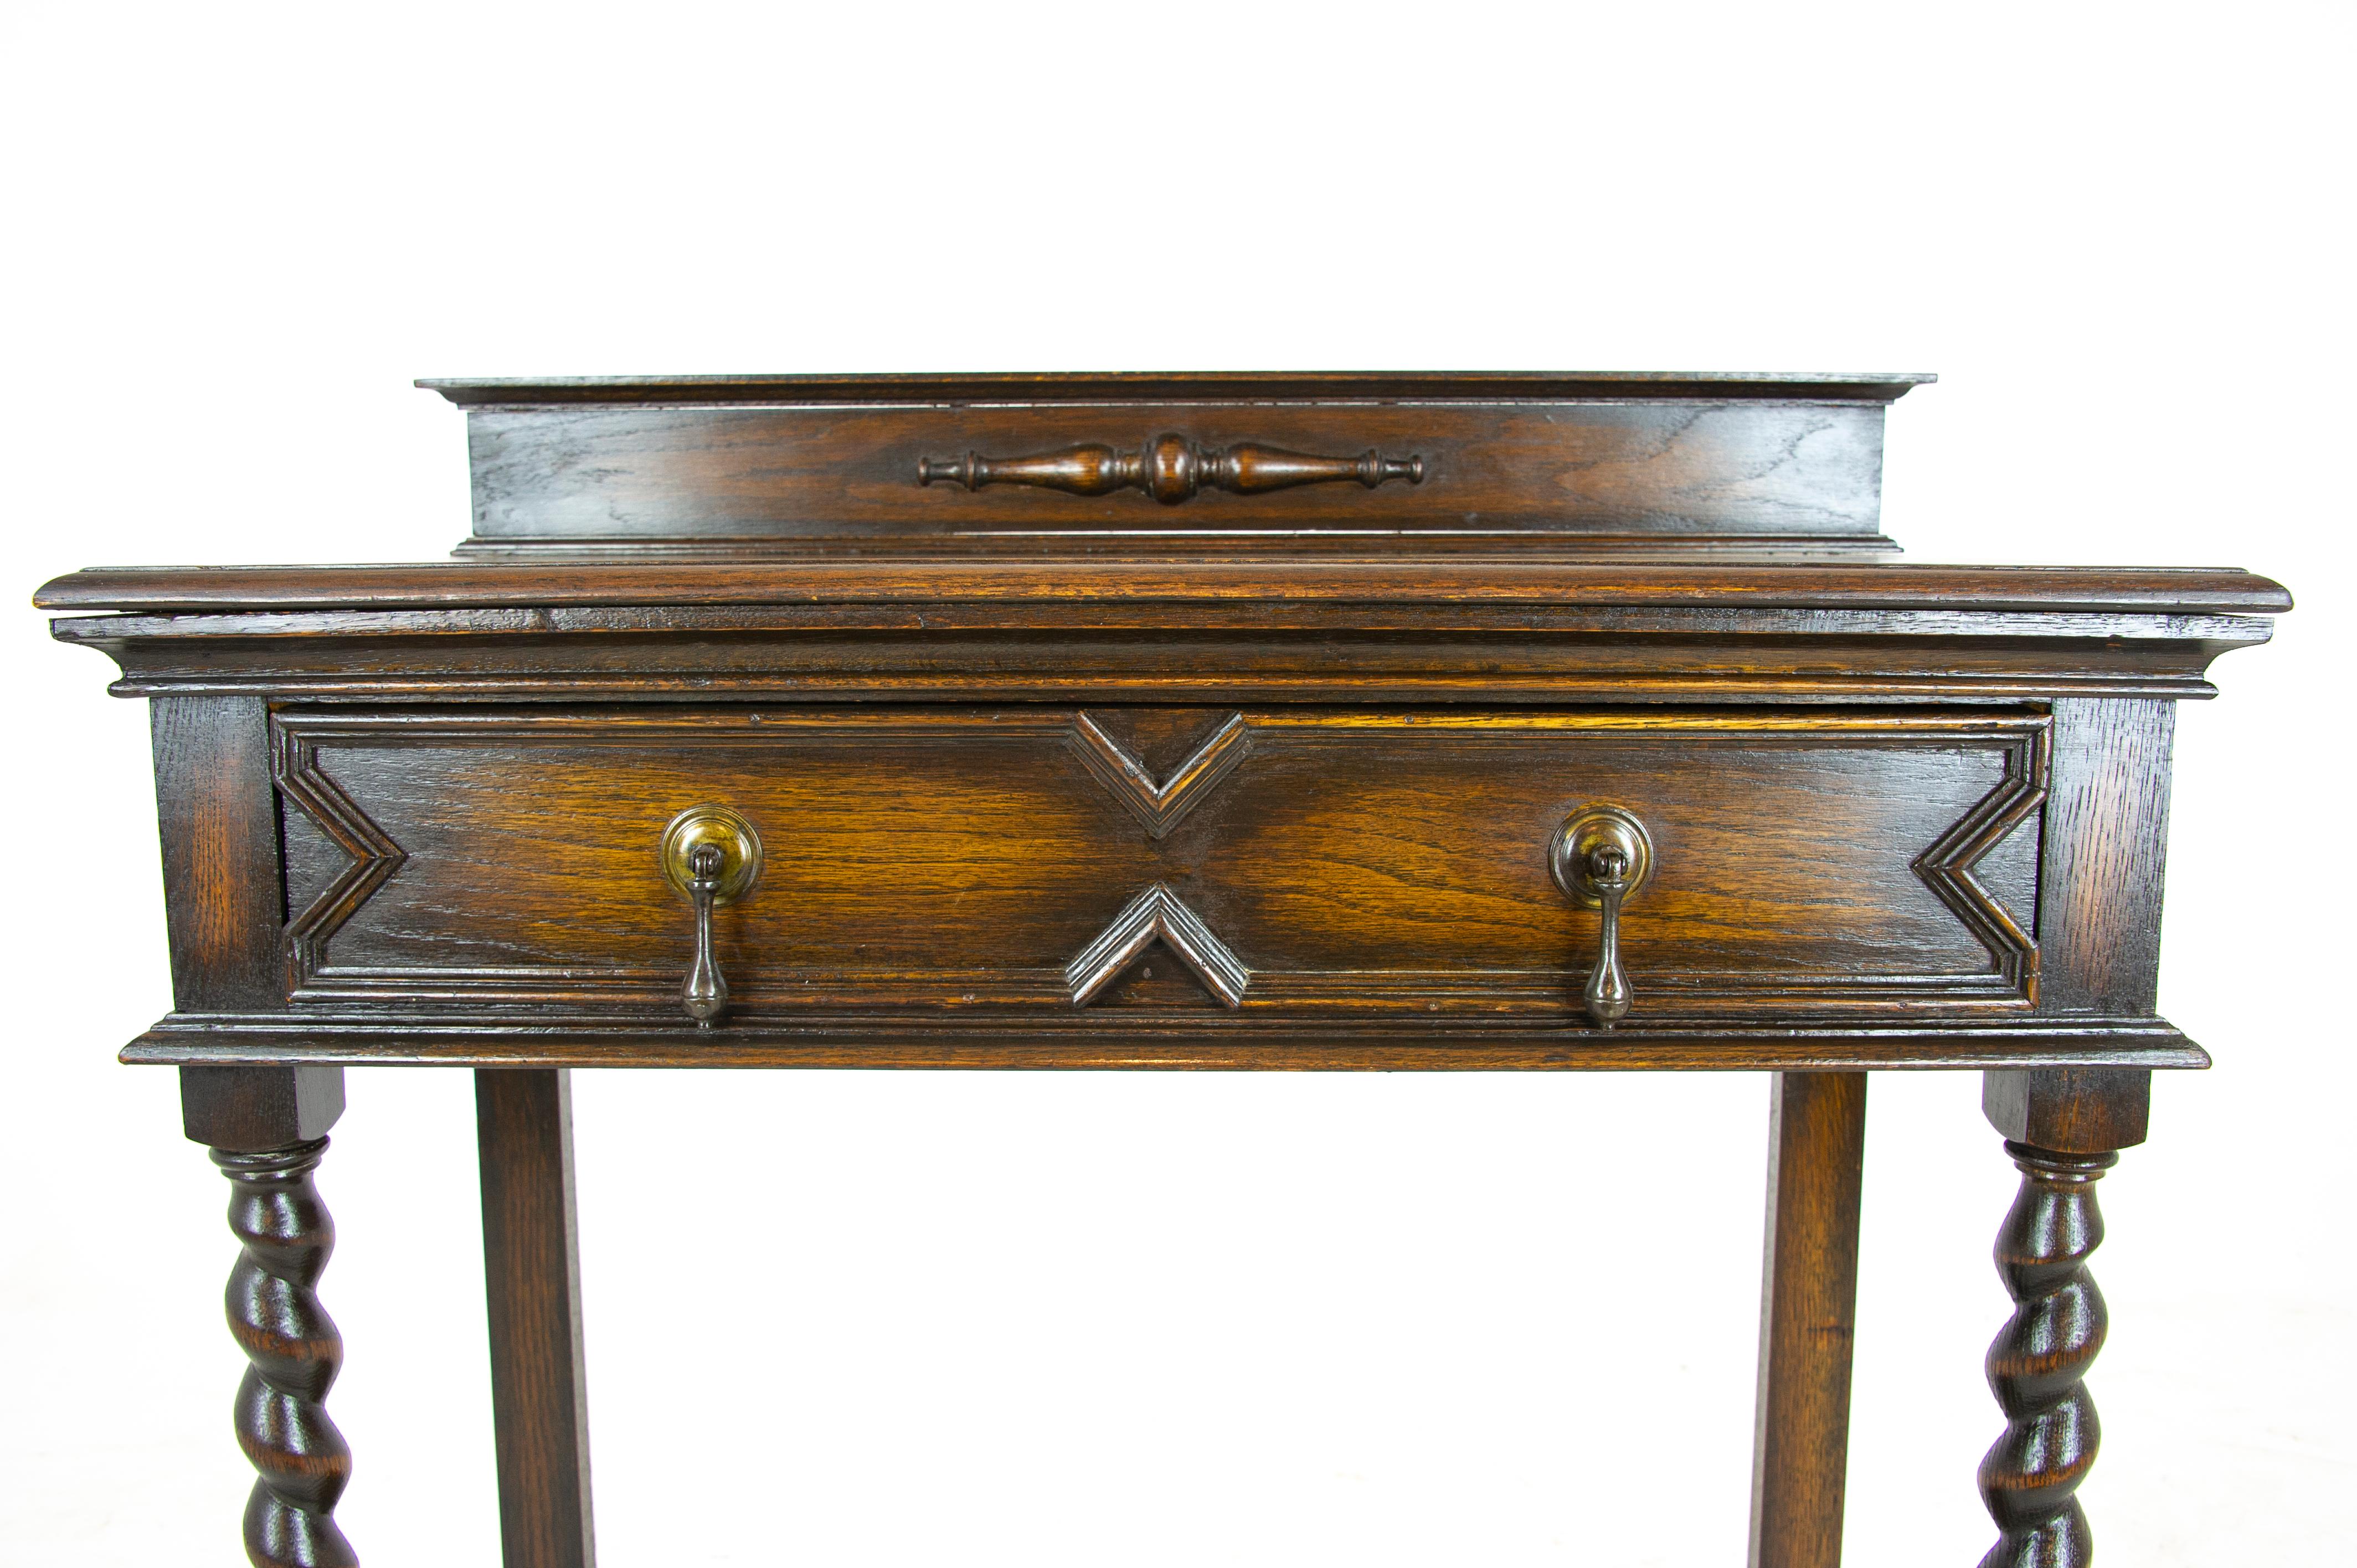 Hand-Crafted Antique Oak Table, Barley Twist Hall Table or Lamp Table, Scotland 1920, B1452